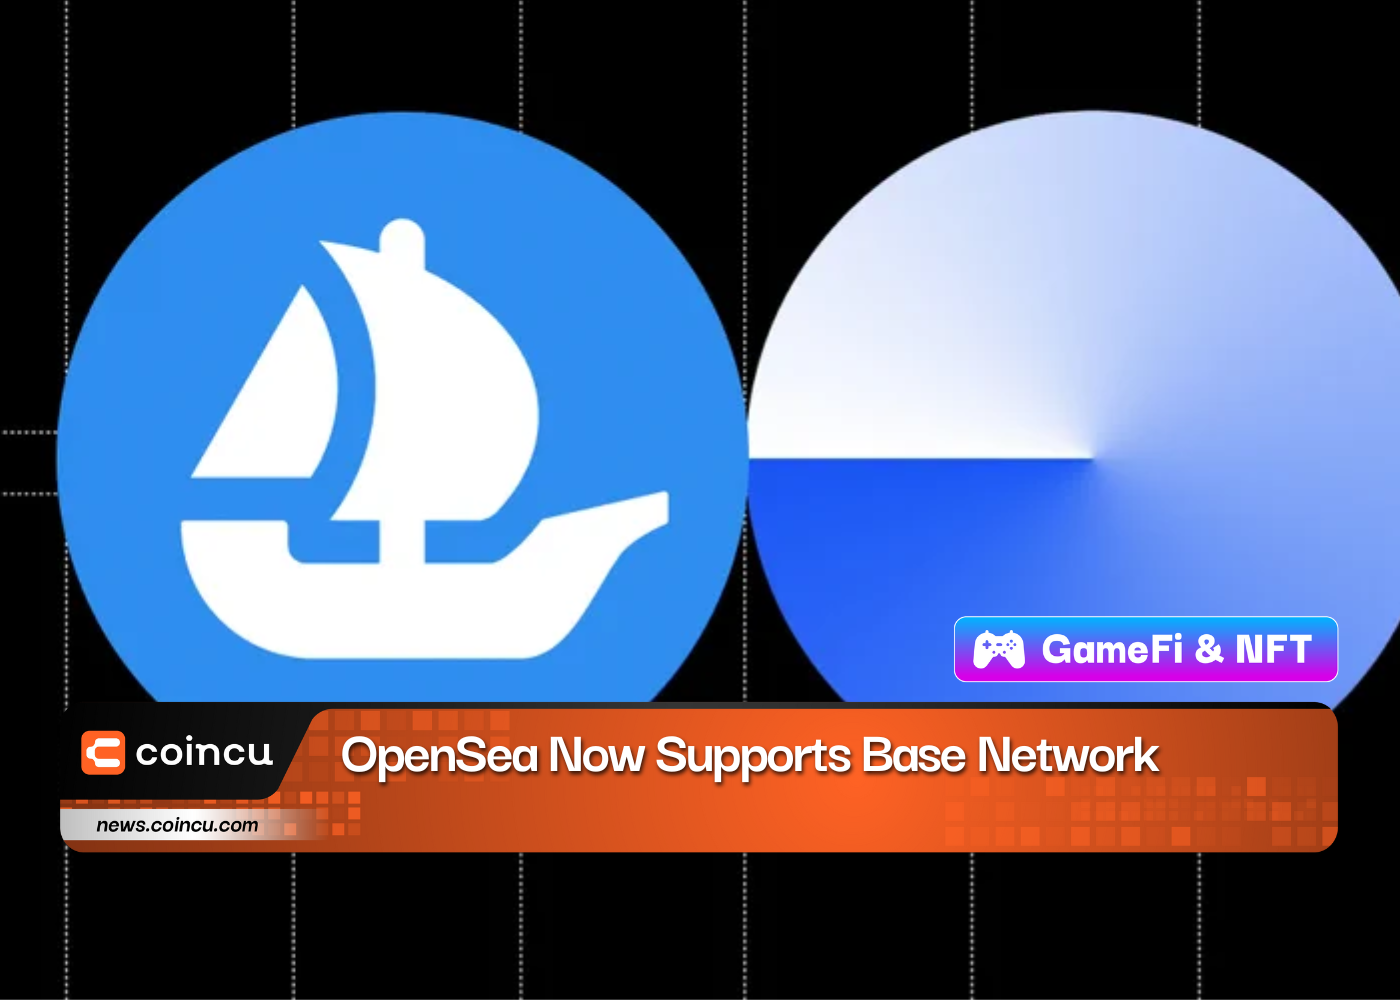 OpenSea Now Supports Base Network